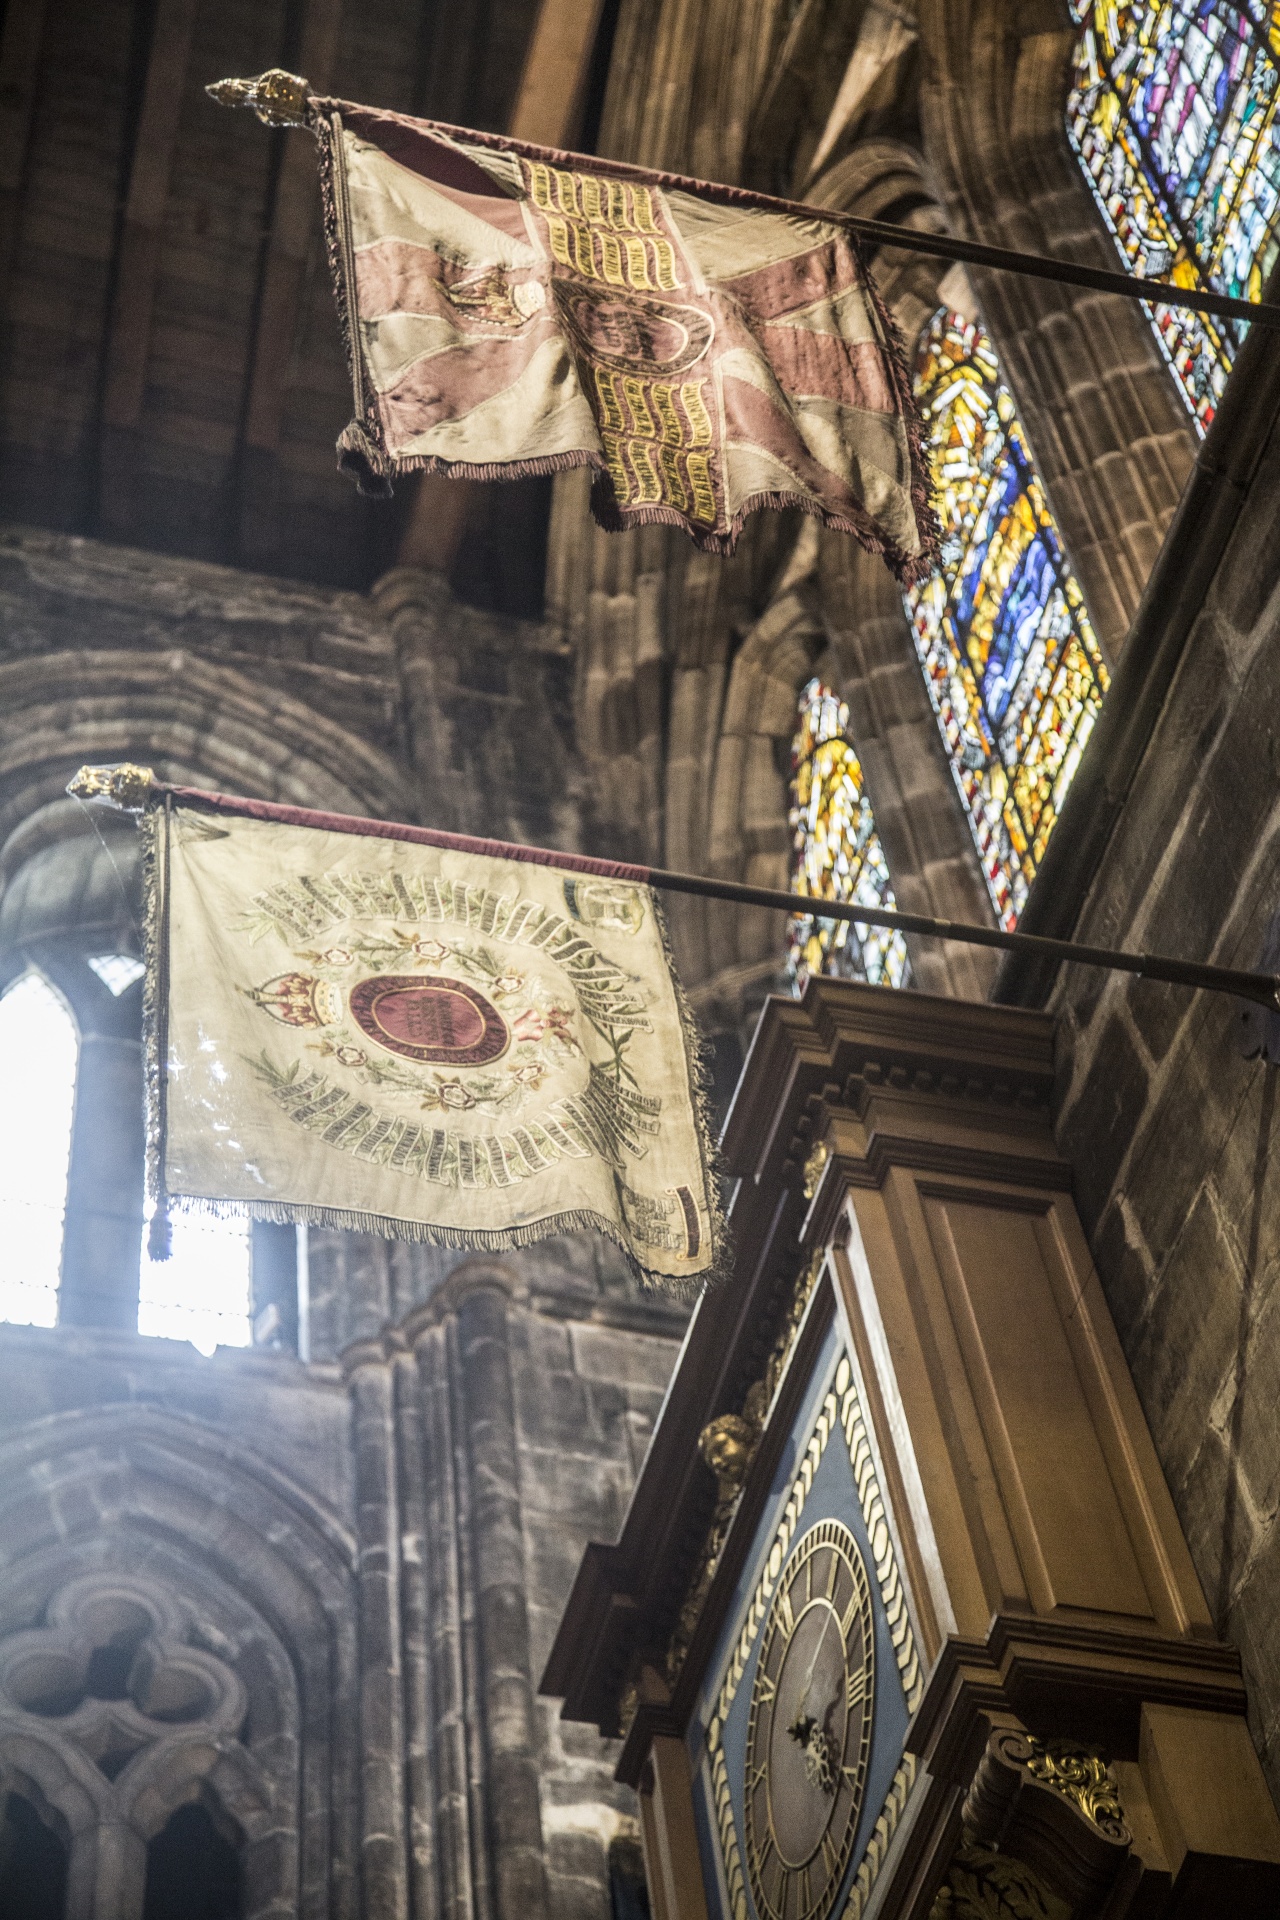 Interior of the Glasgow Cathedral (High Kirk of Glasgow or St Kentigern's or St Mungo's Cathedral). One of the sights of Glasgow, Scotland